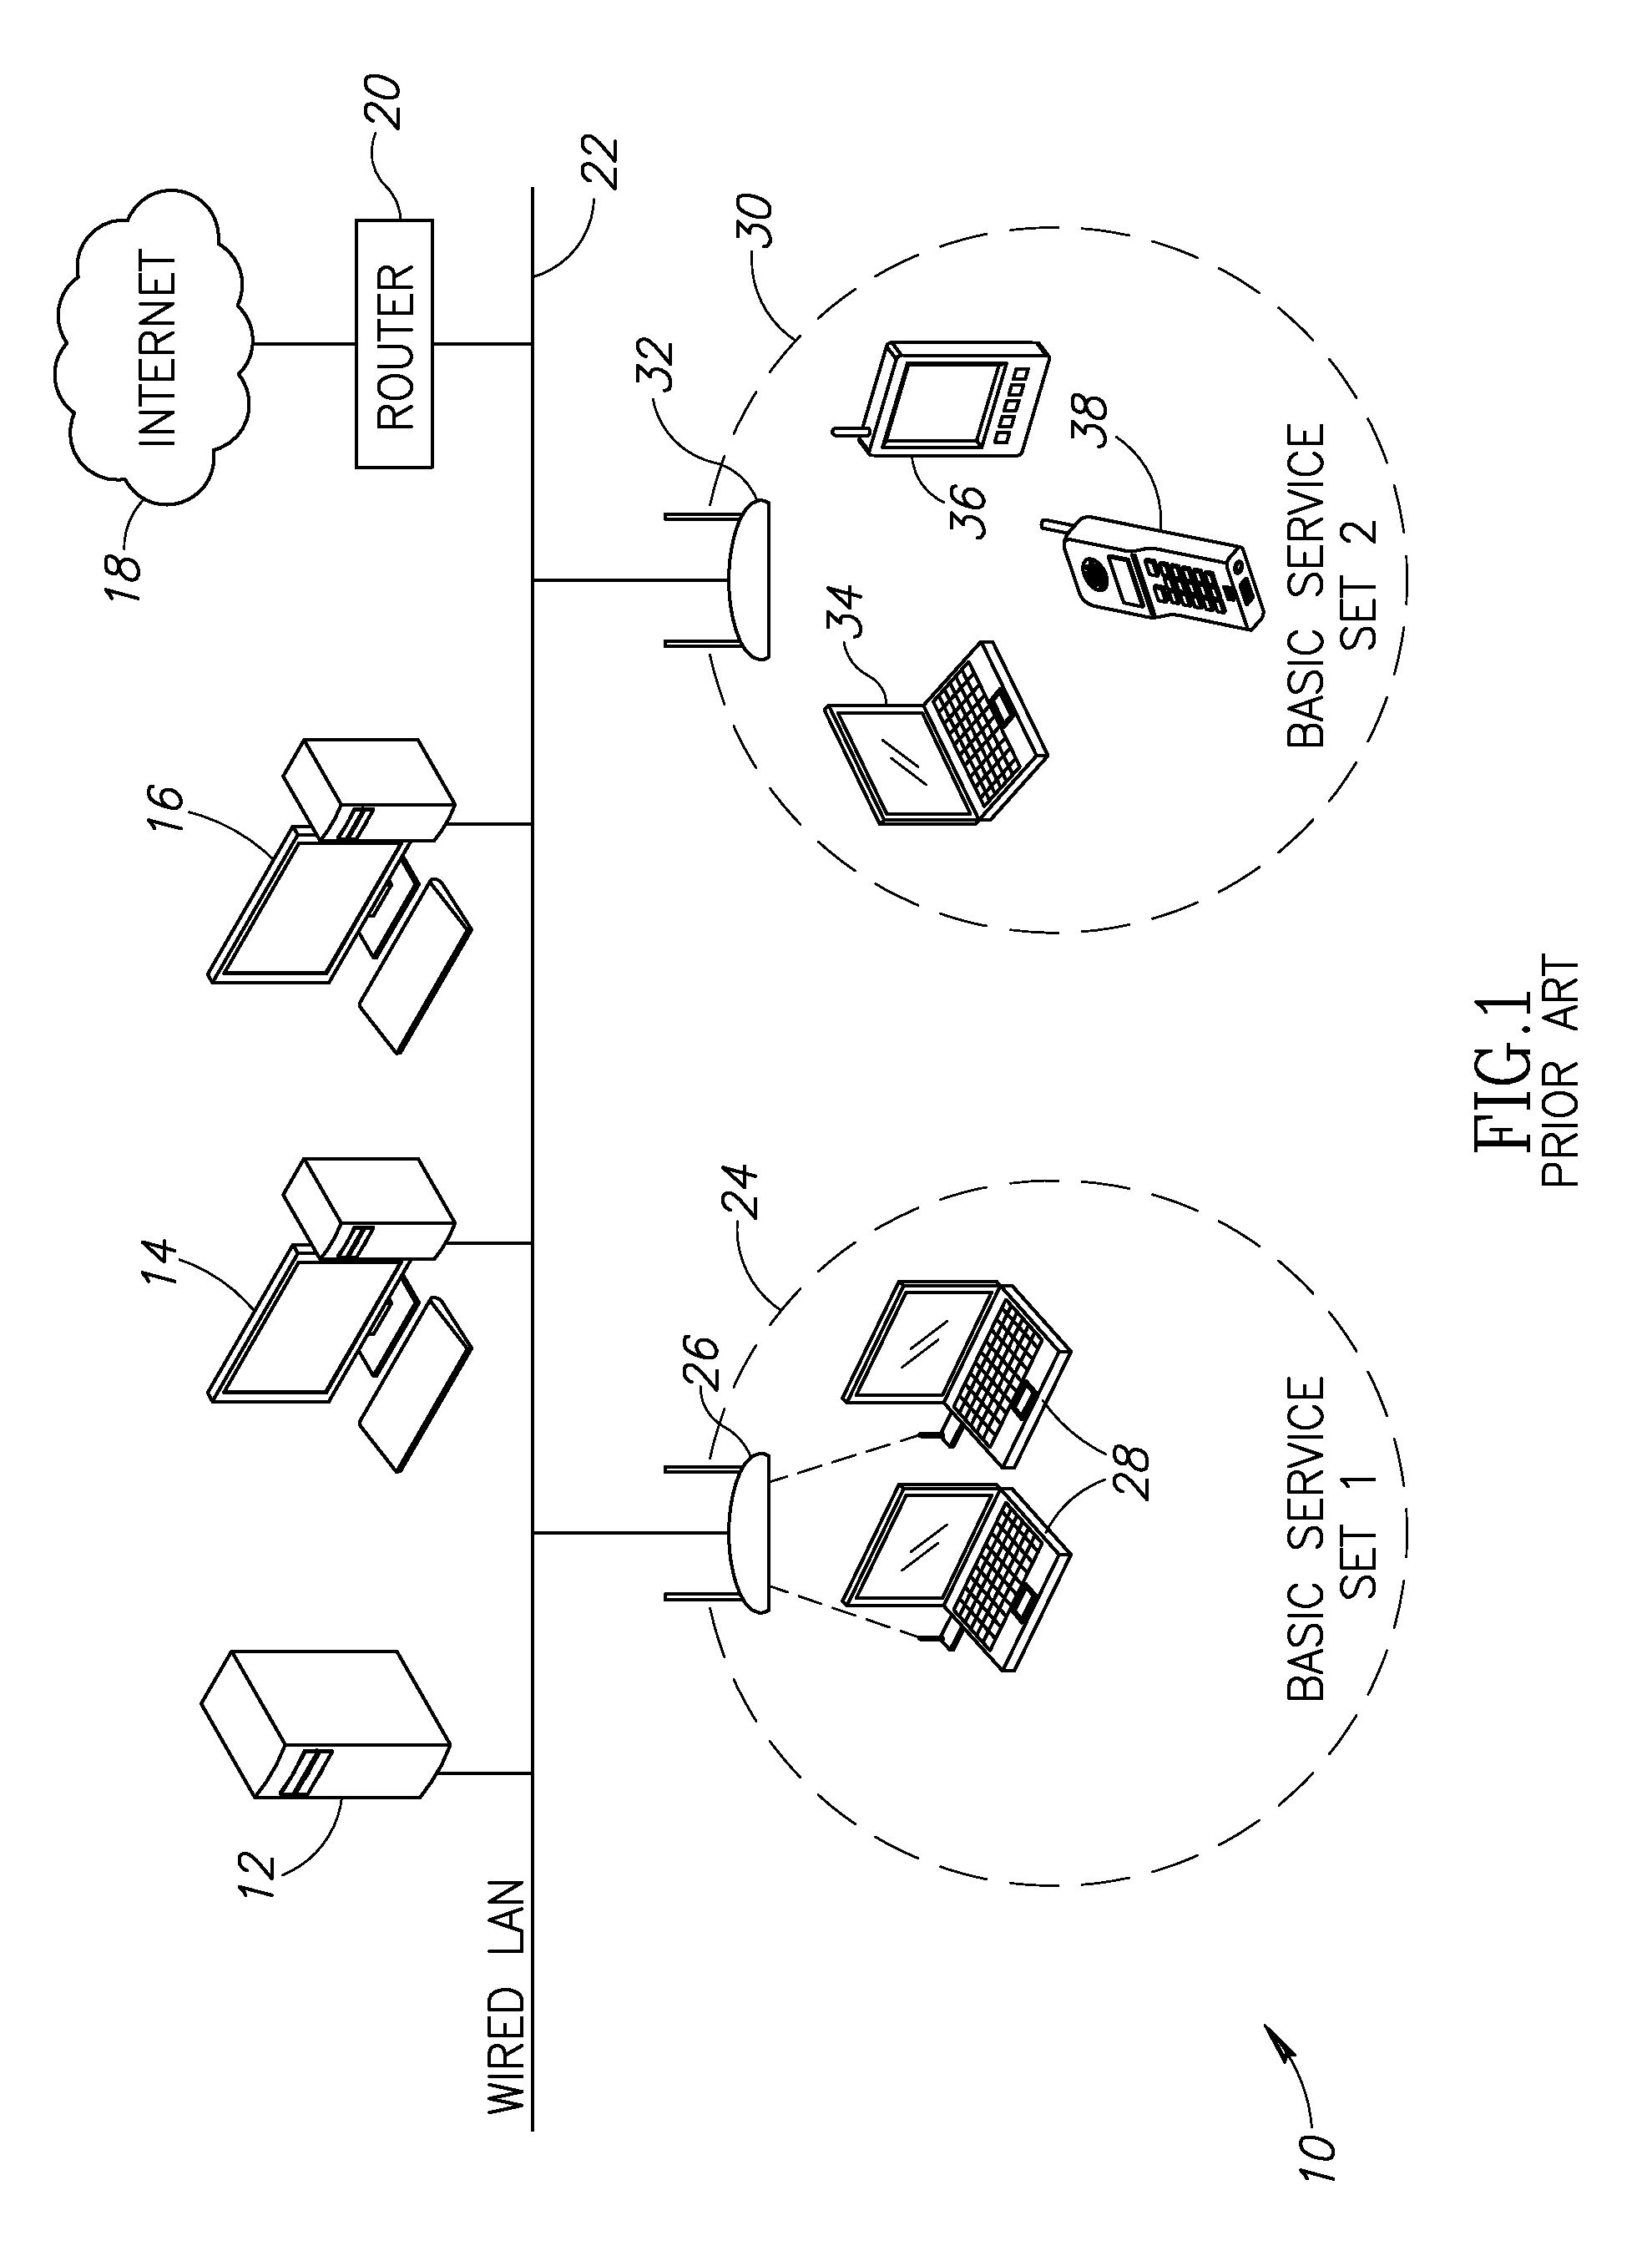 Idle connection state power consumption reduction in a wireless local area network using variable beacon data advertisement